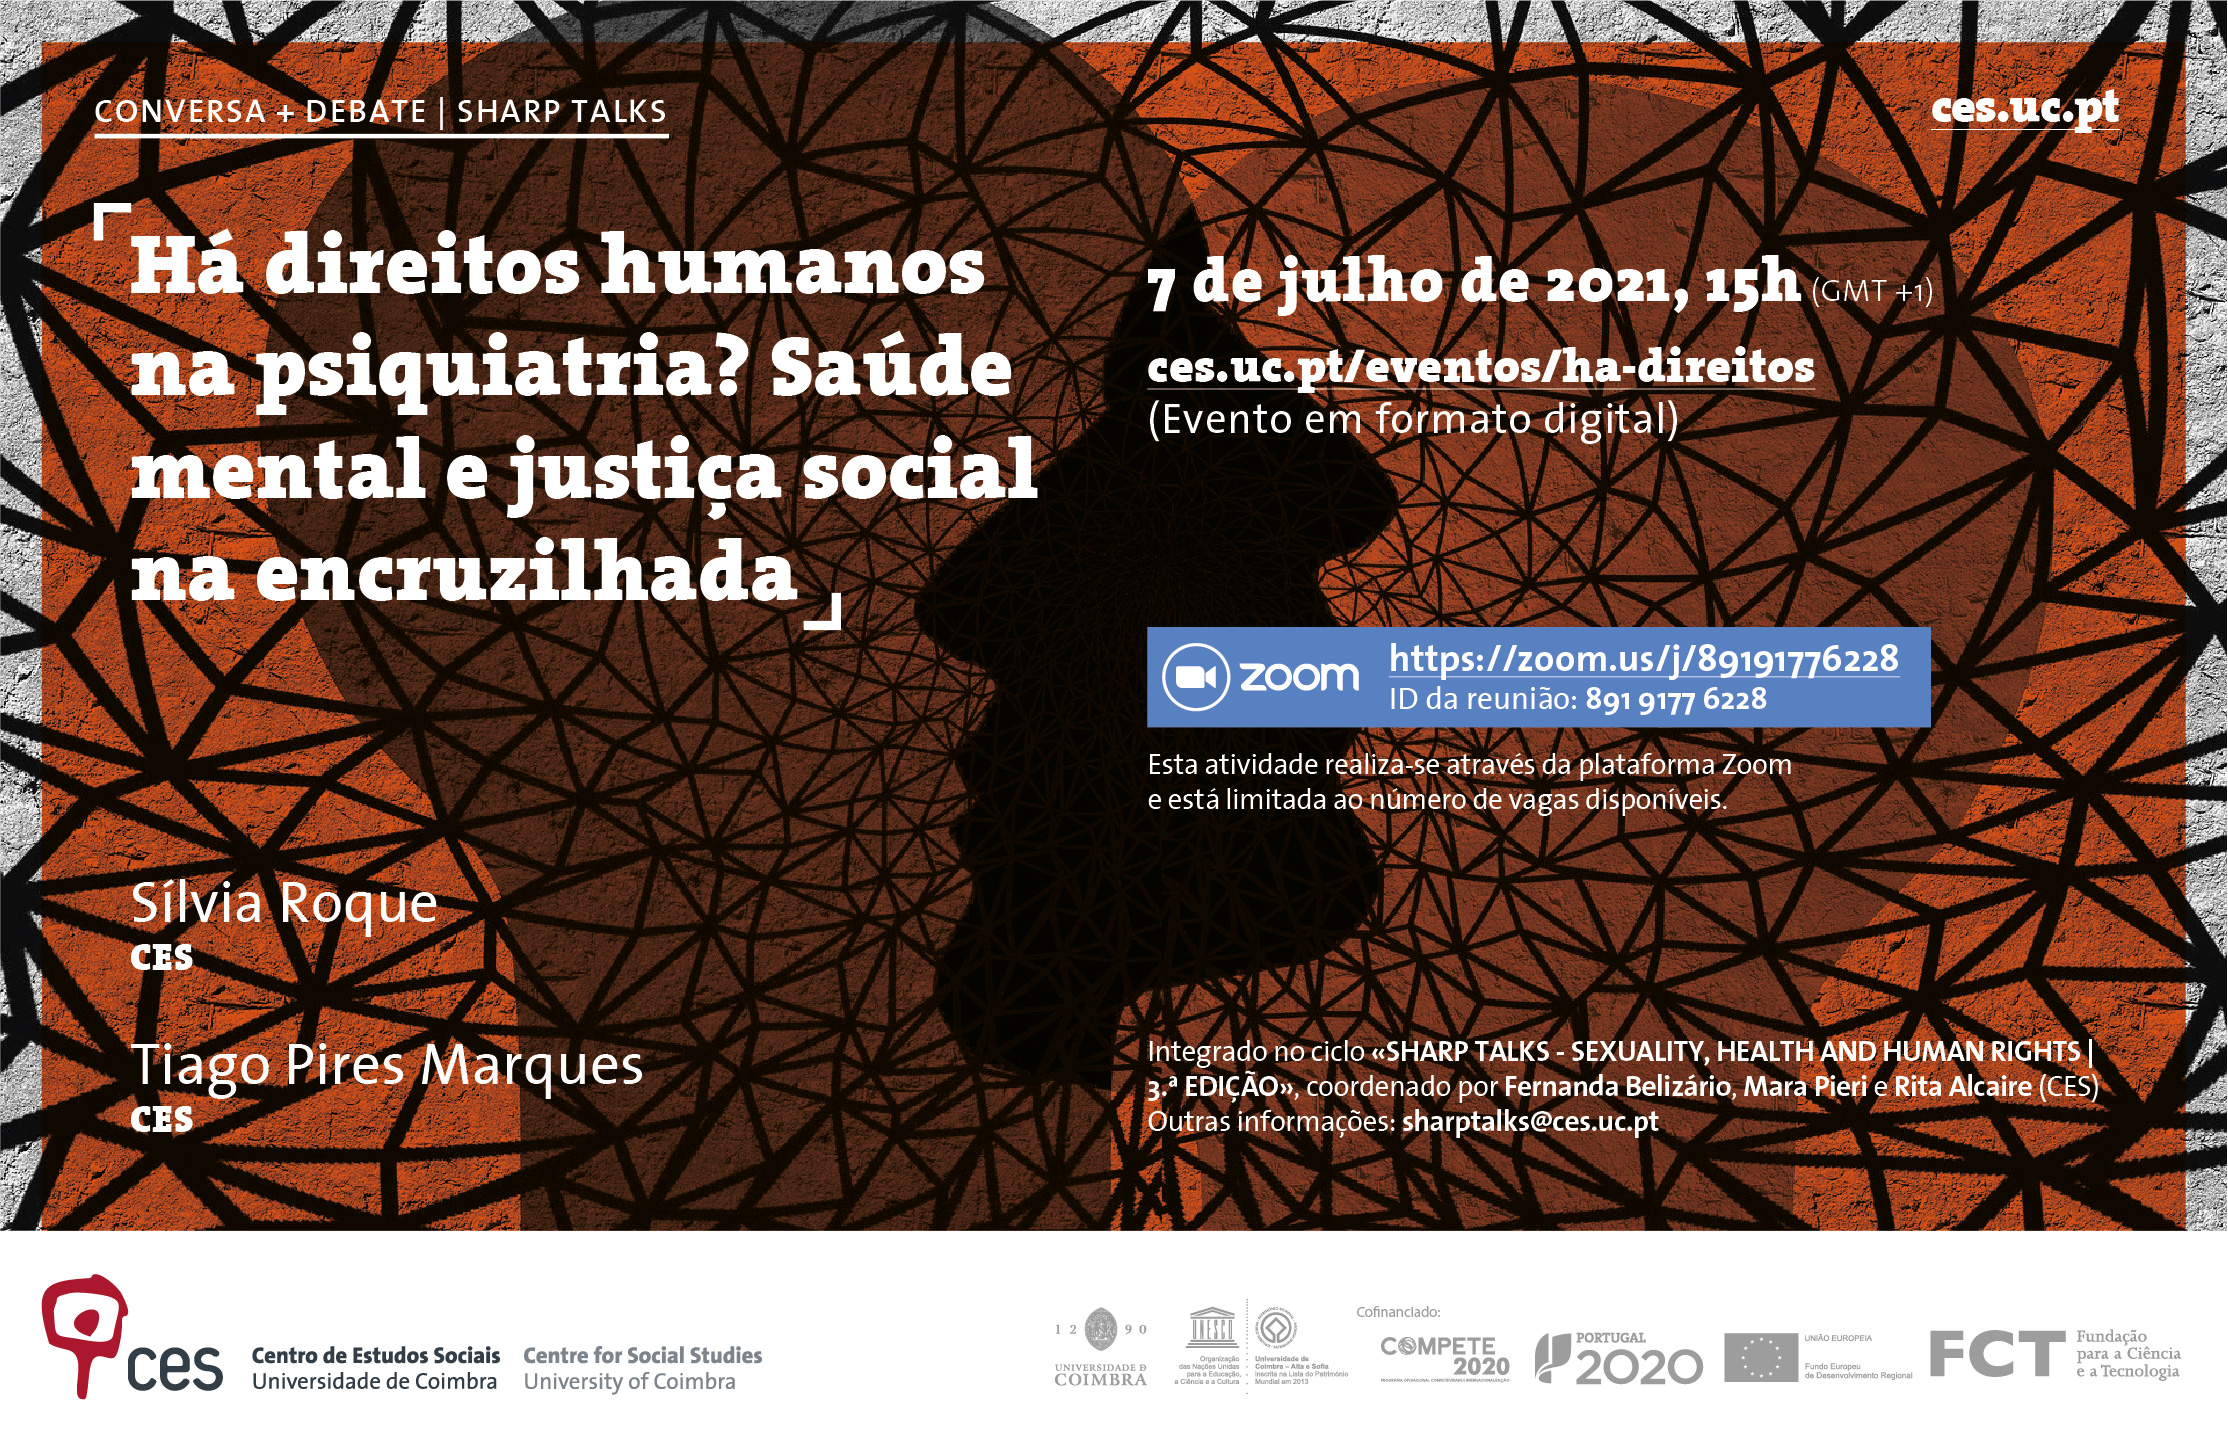 Are there human rights in psychiatry? Mental health and social justice at a crossroads<span id="edit_34801"><script>$(function() { $('#edit_34801').load( "/myces/user/editobj.php?tipo=evento&id=34801" ); });</script></span>